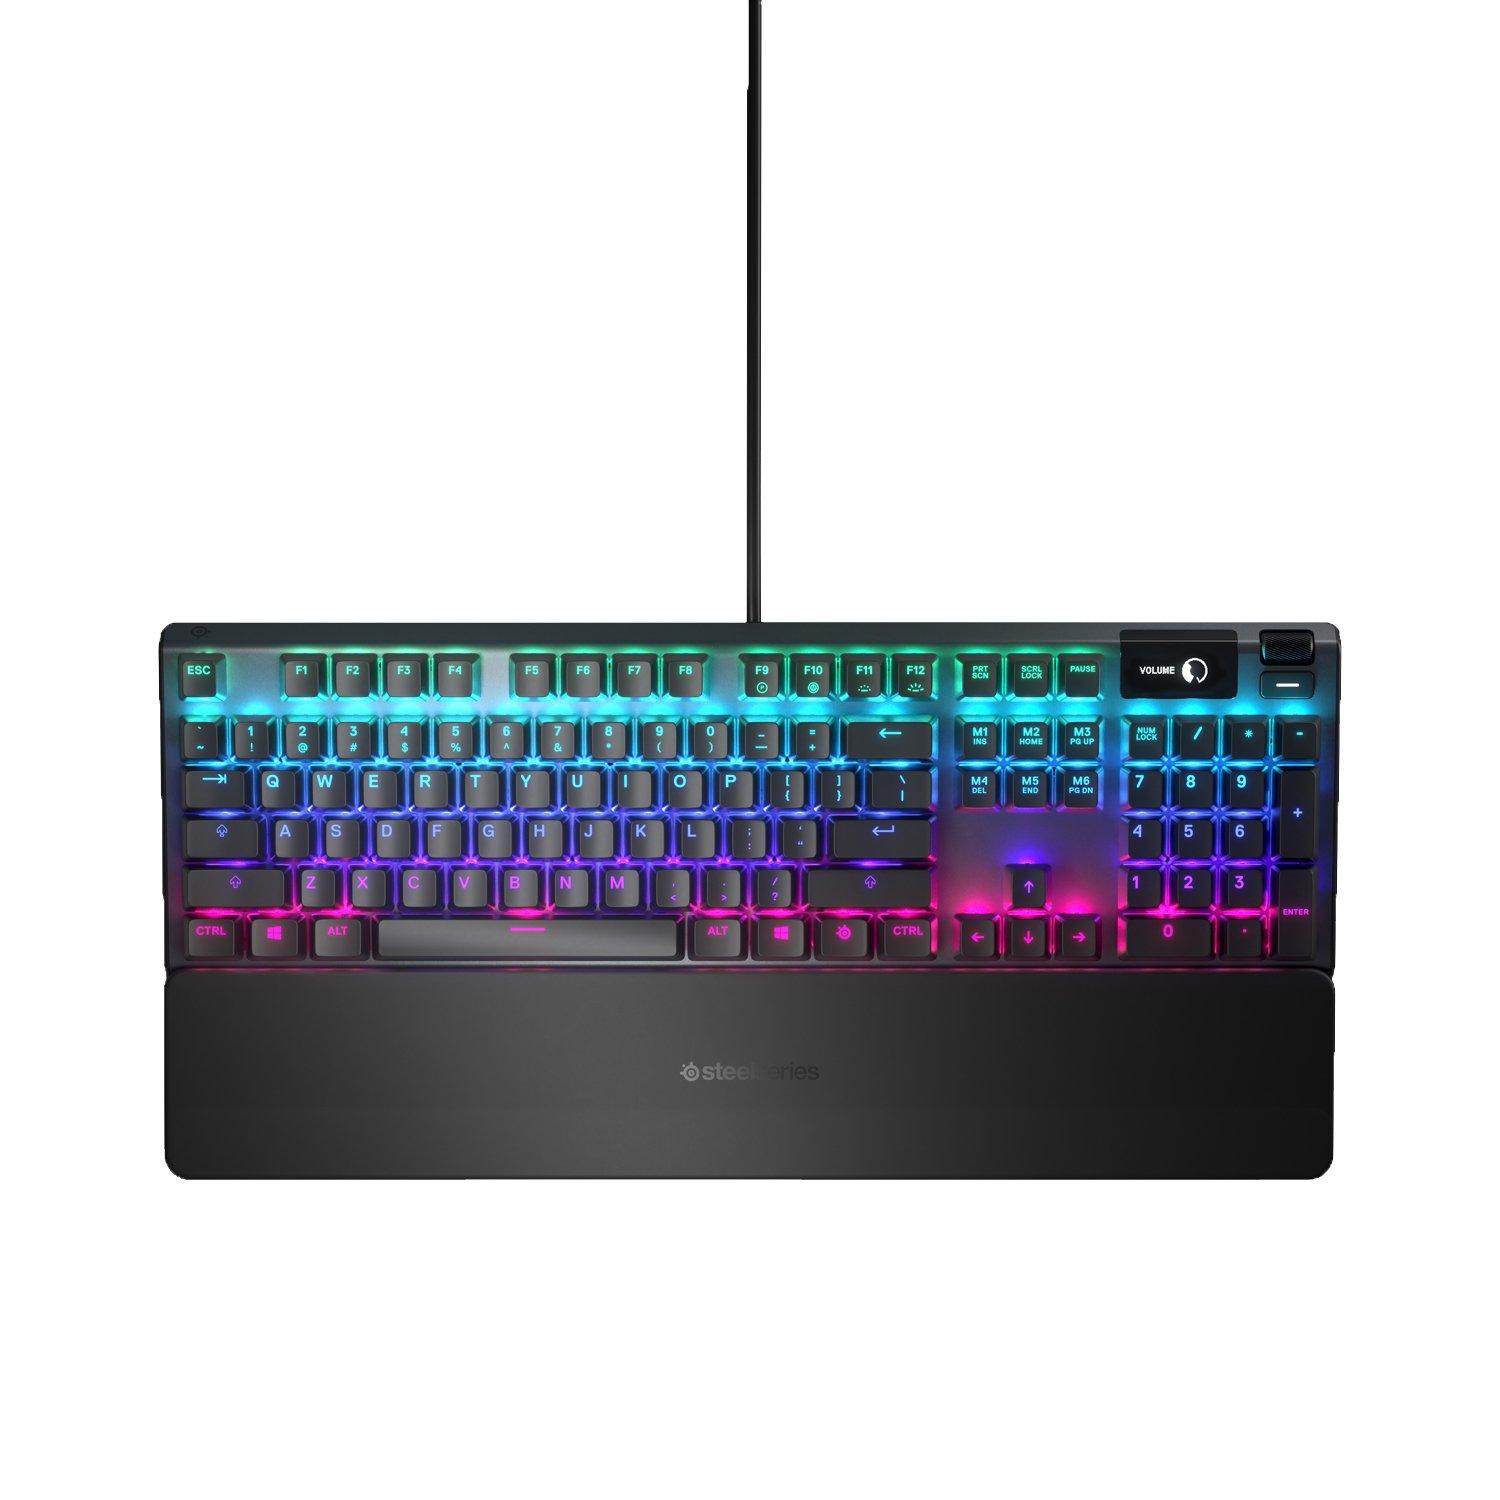 Keyboard 5 Hybrid Wired RGB | Apex GameStop SteelSeries Gaming Mechanical Blue Switches